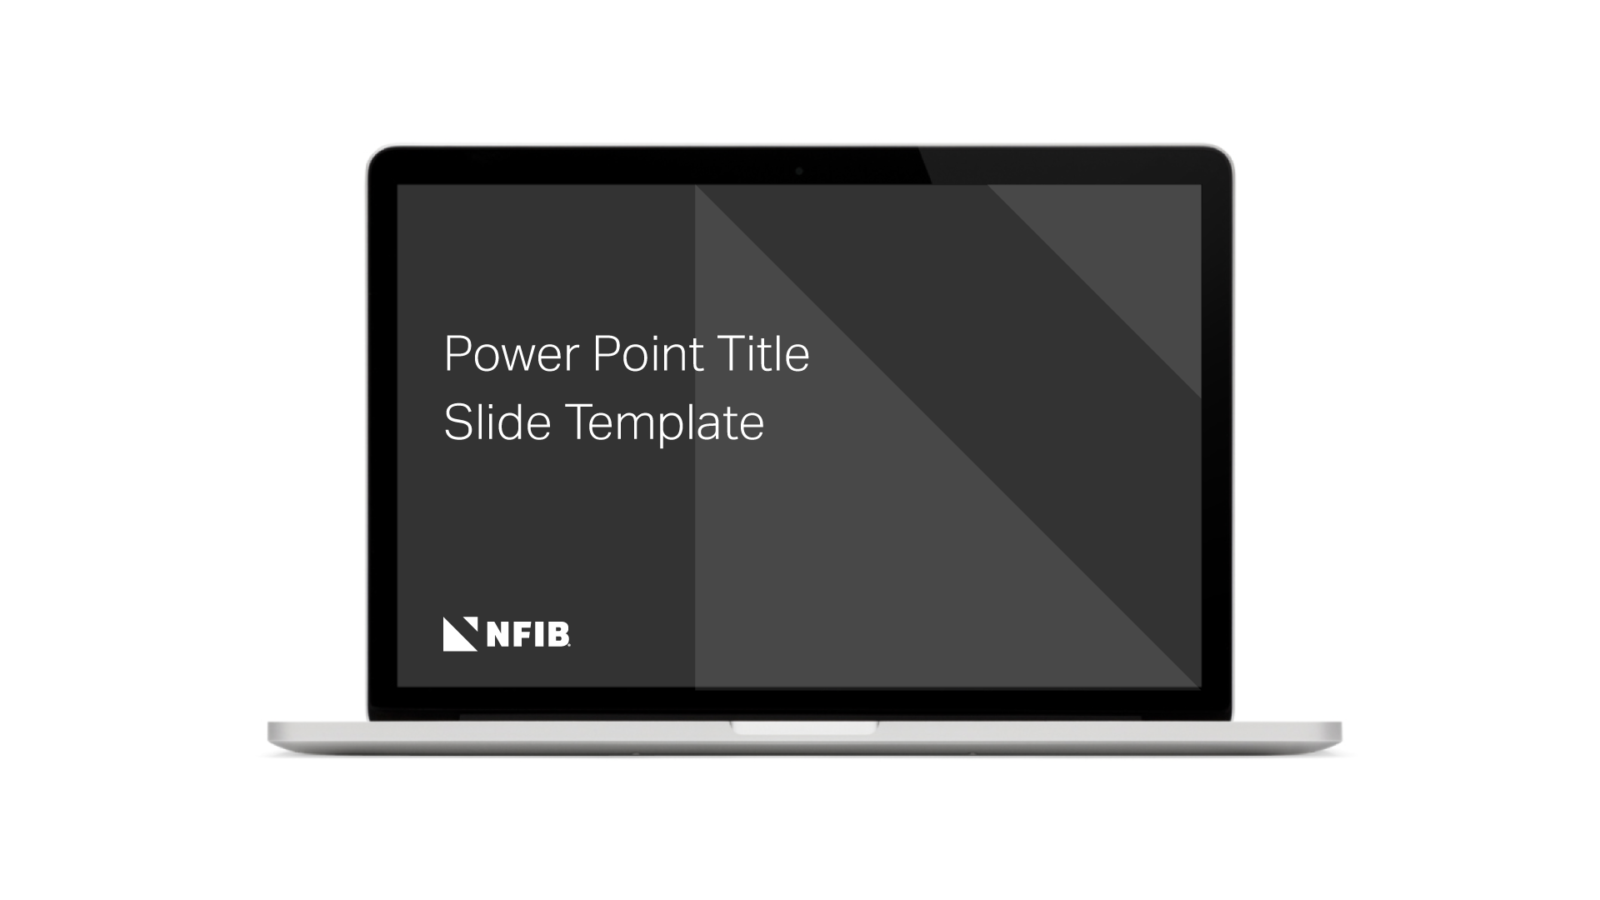 NFIB Independent and Small Business Association Branding and Strategy Powepoint Template